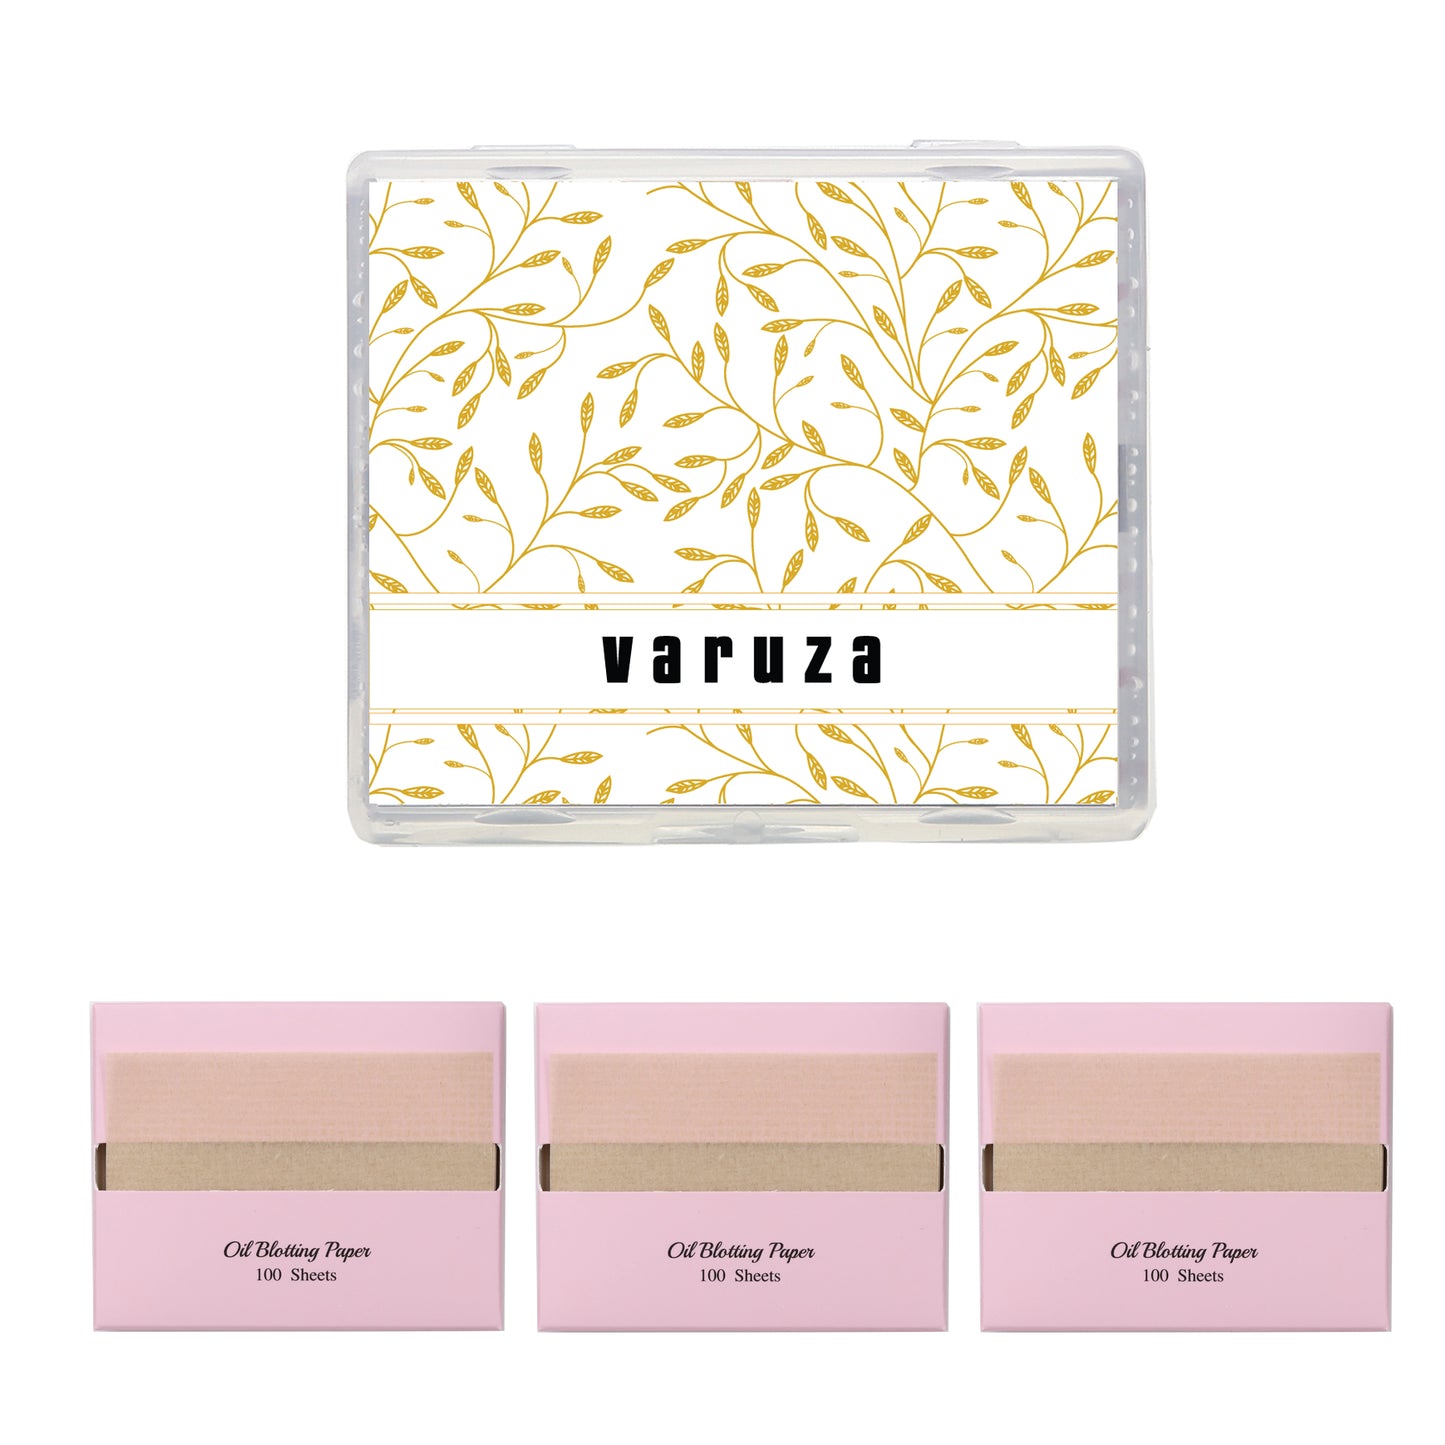 Natural Hemp Face Oil Blotting Paper with Mirror Case and Refills - Linen